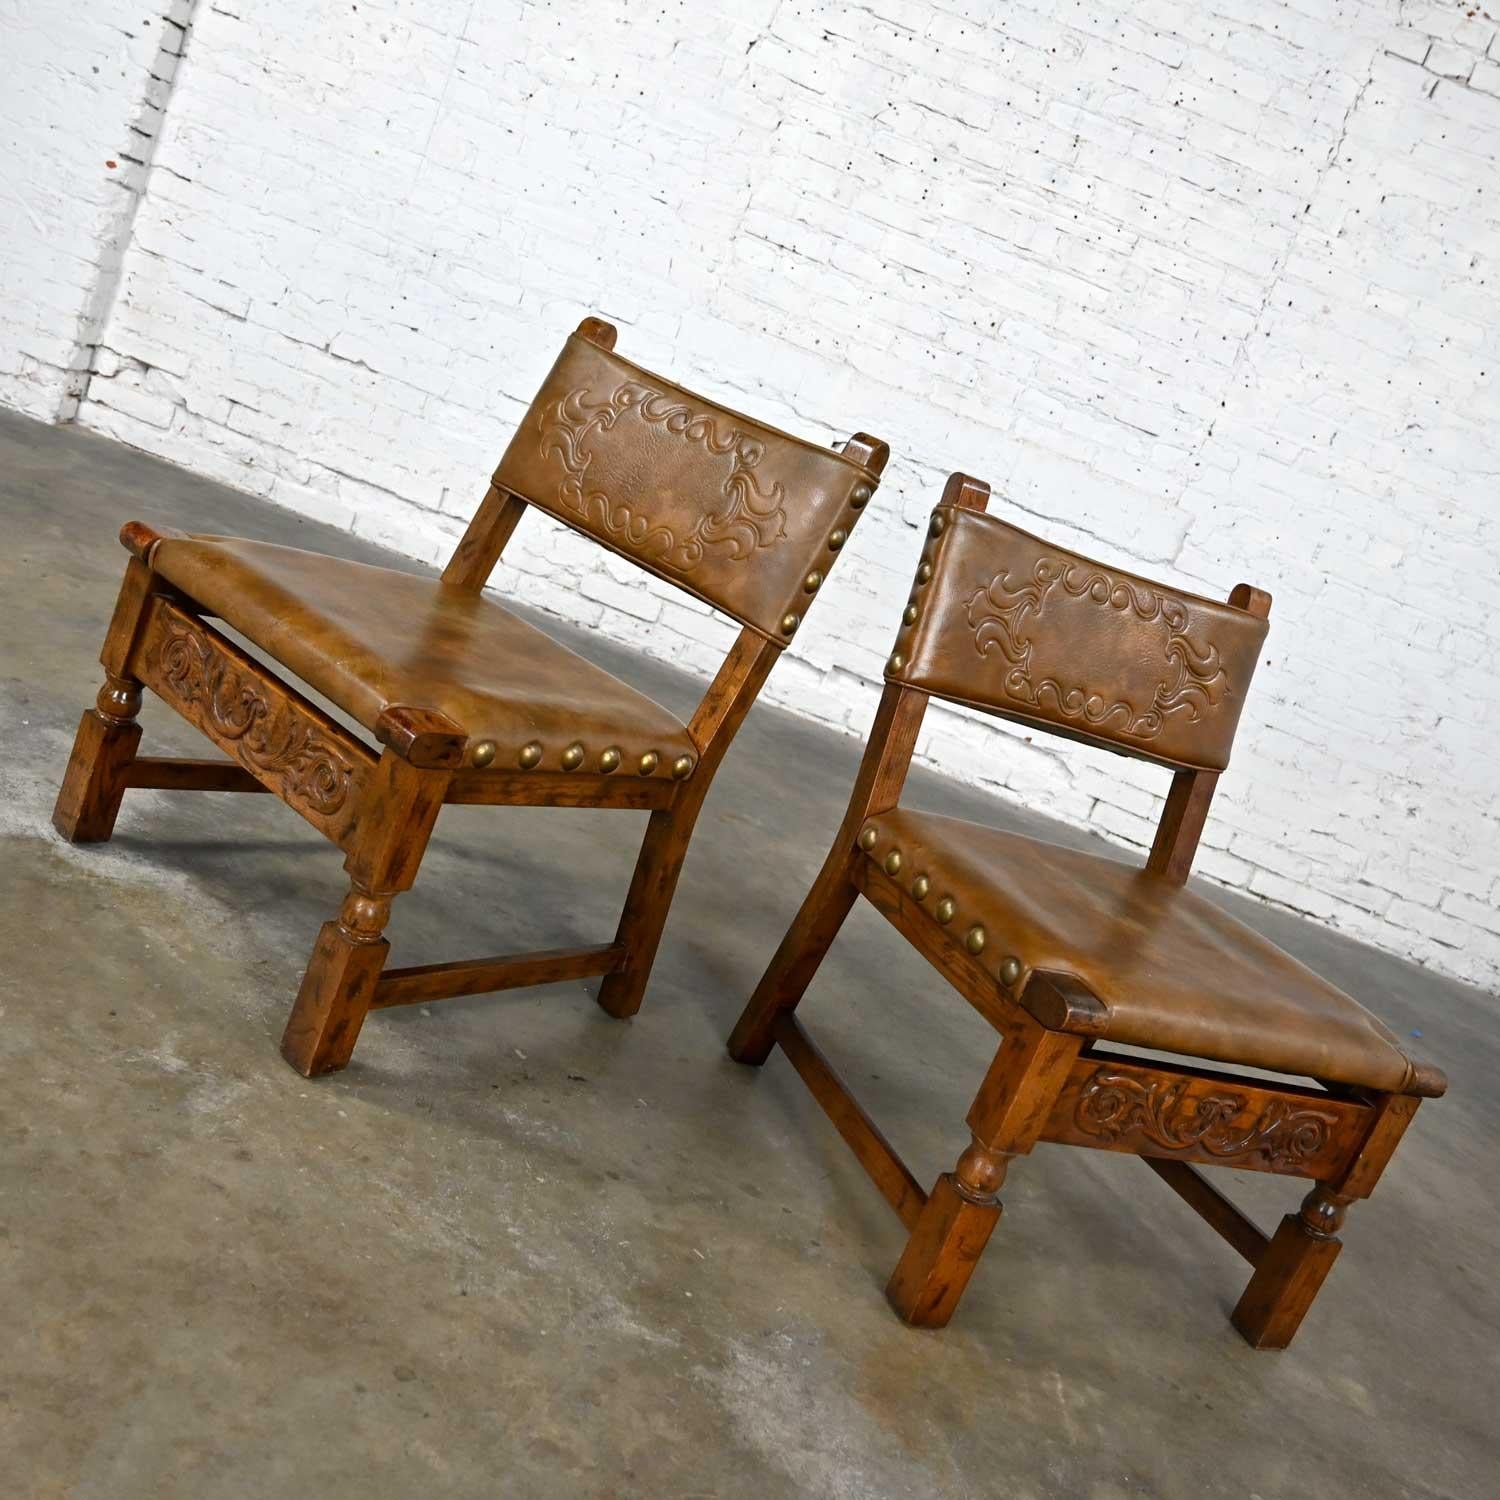 Spanish Colonial Vintage Spanish Revival Oak Pair of Chairs with Tooled Cognac Faux Leather Seat For Sale